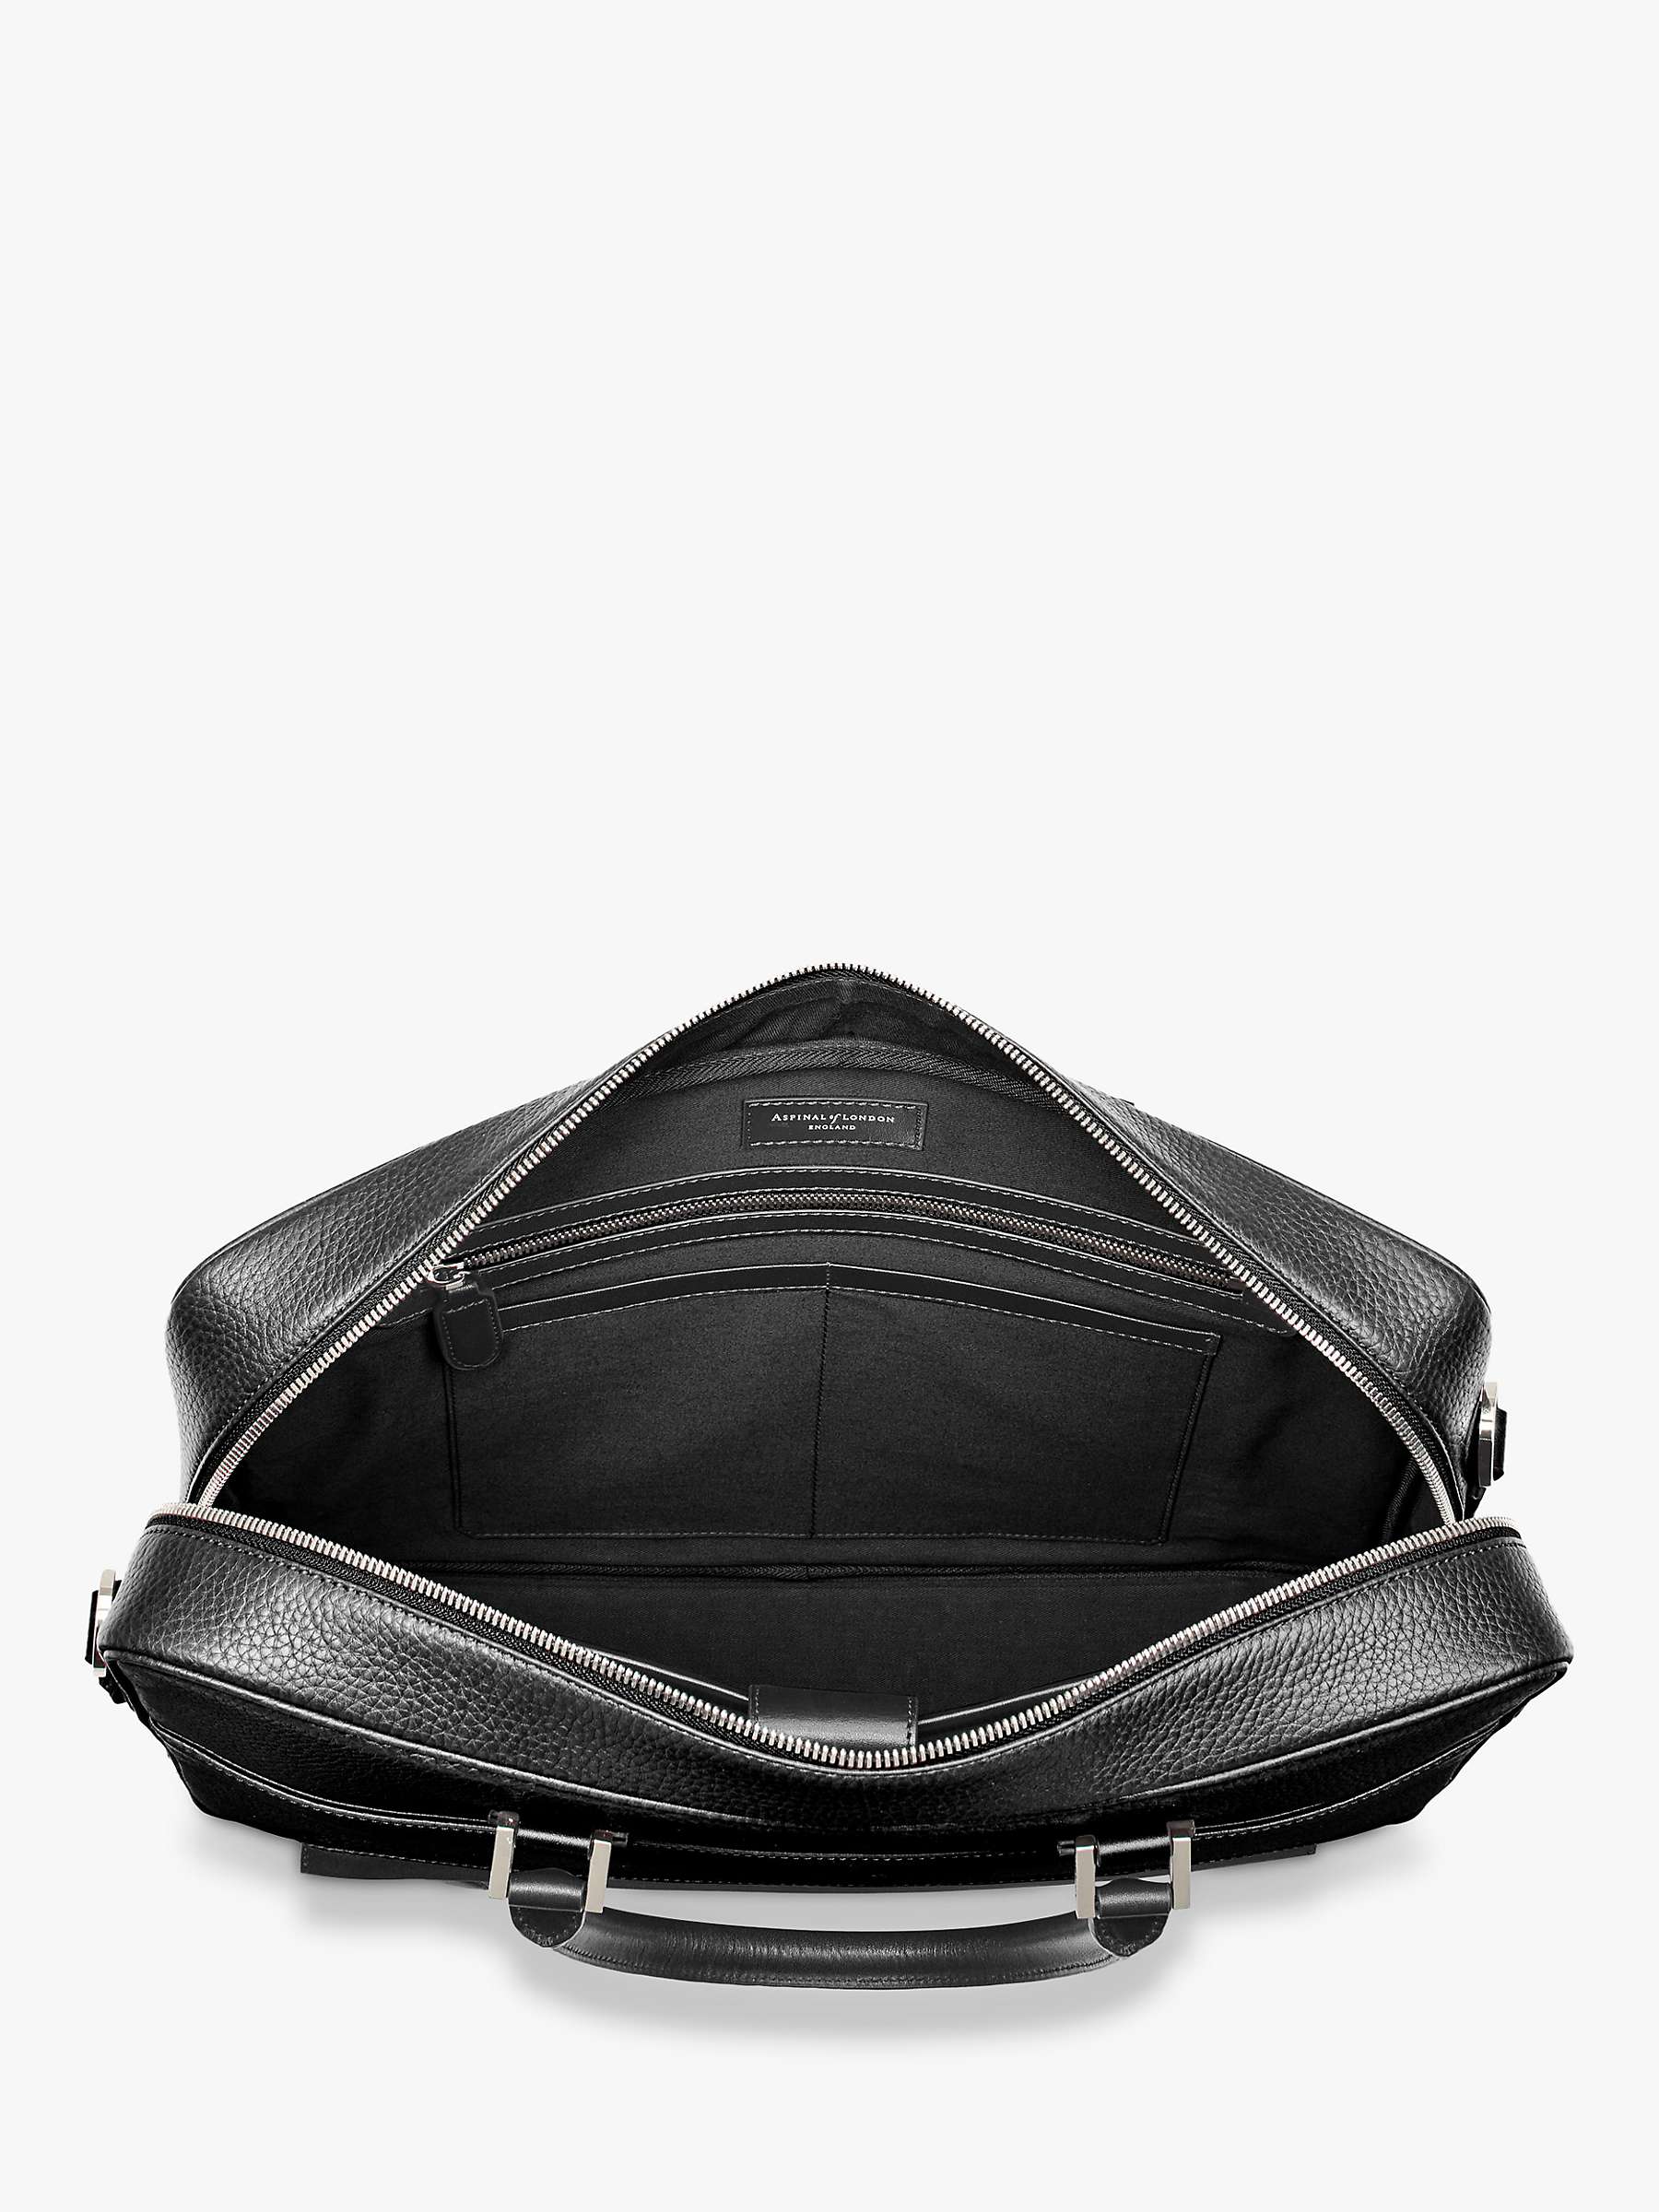 Buy Aspinal of London Mount Street Small Pebble Grain Leather Laptop Bag Online at johnlewis.com